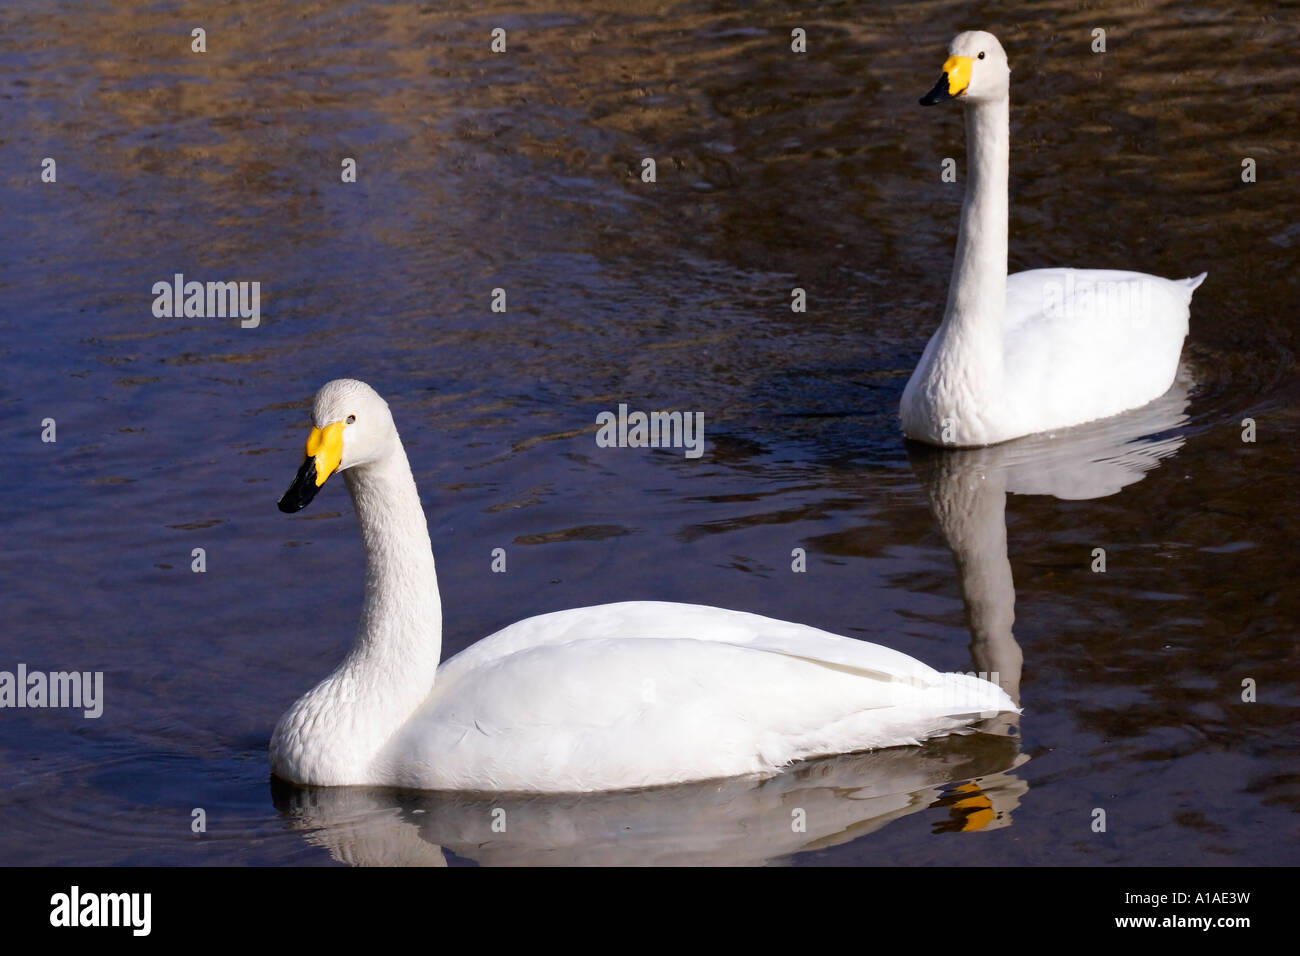 Couple of whooper swans swimming on the water (Cygnus cygnus) Stock Photo